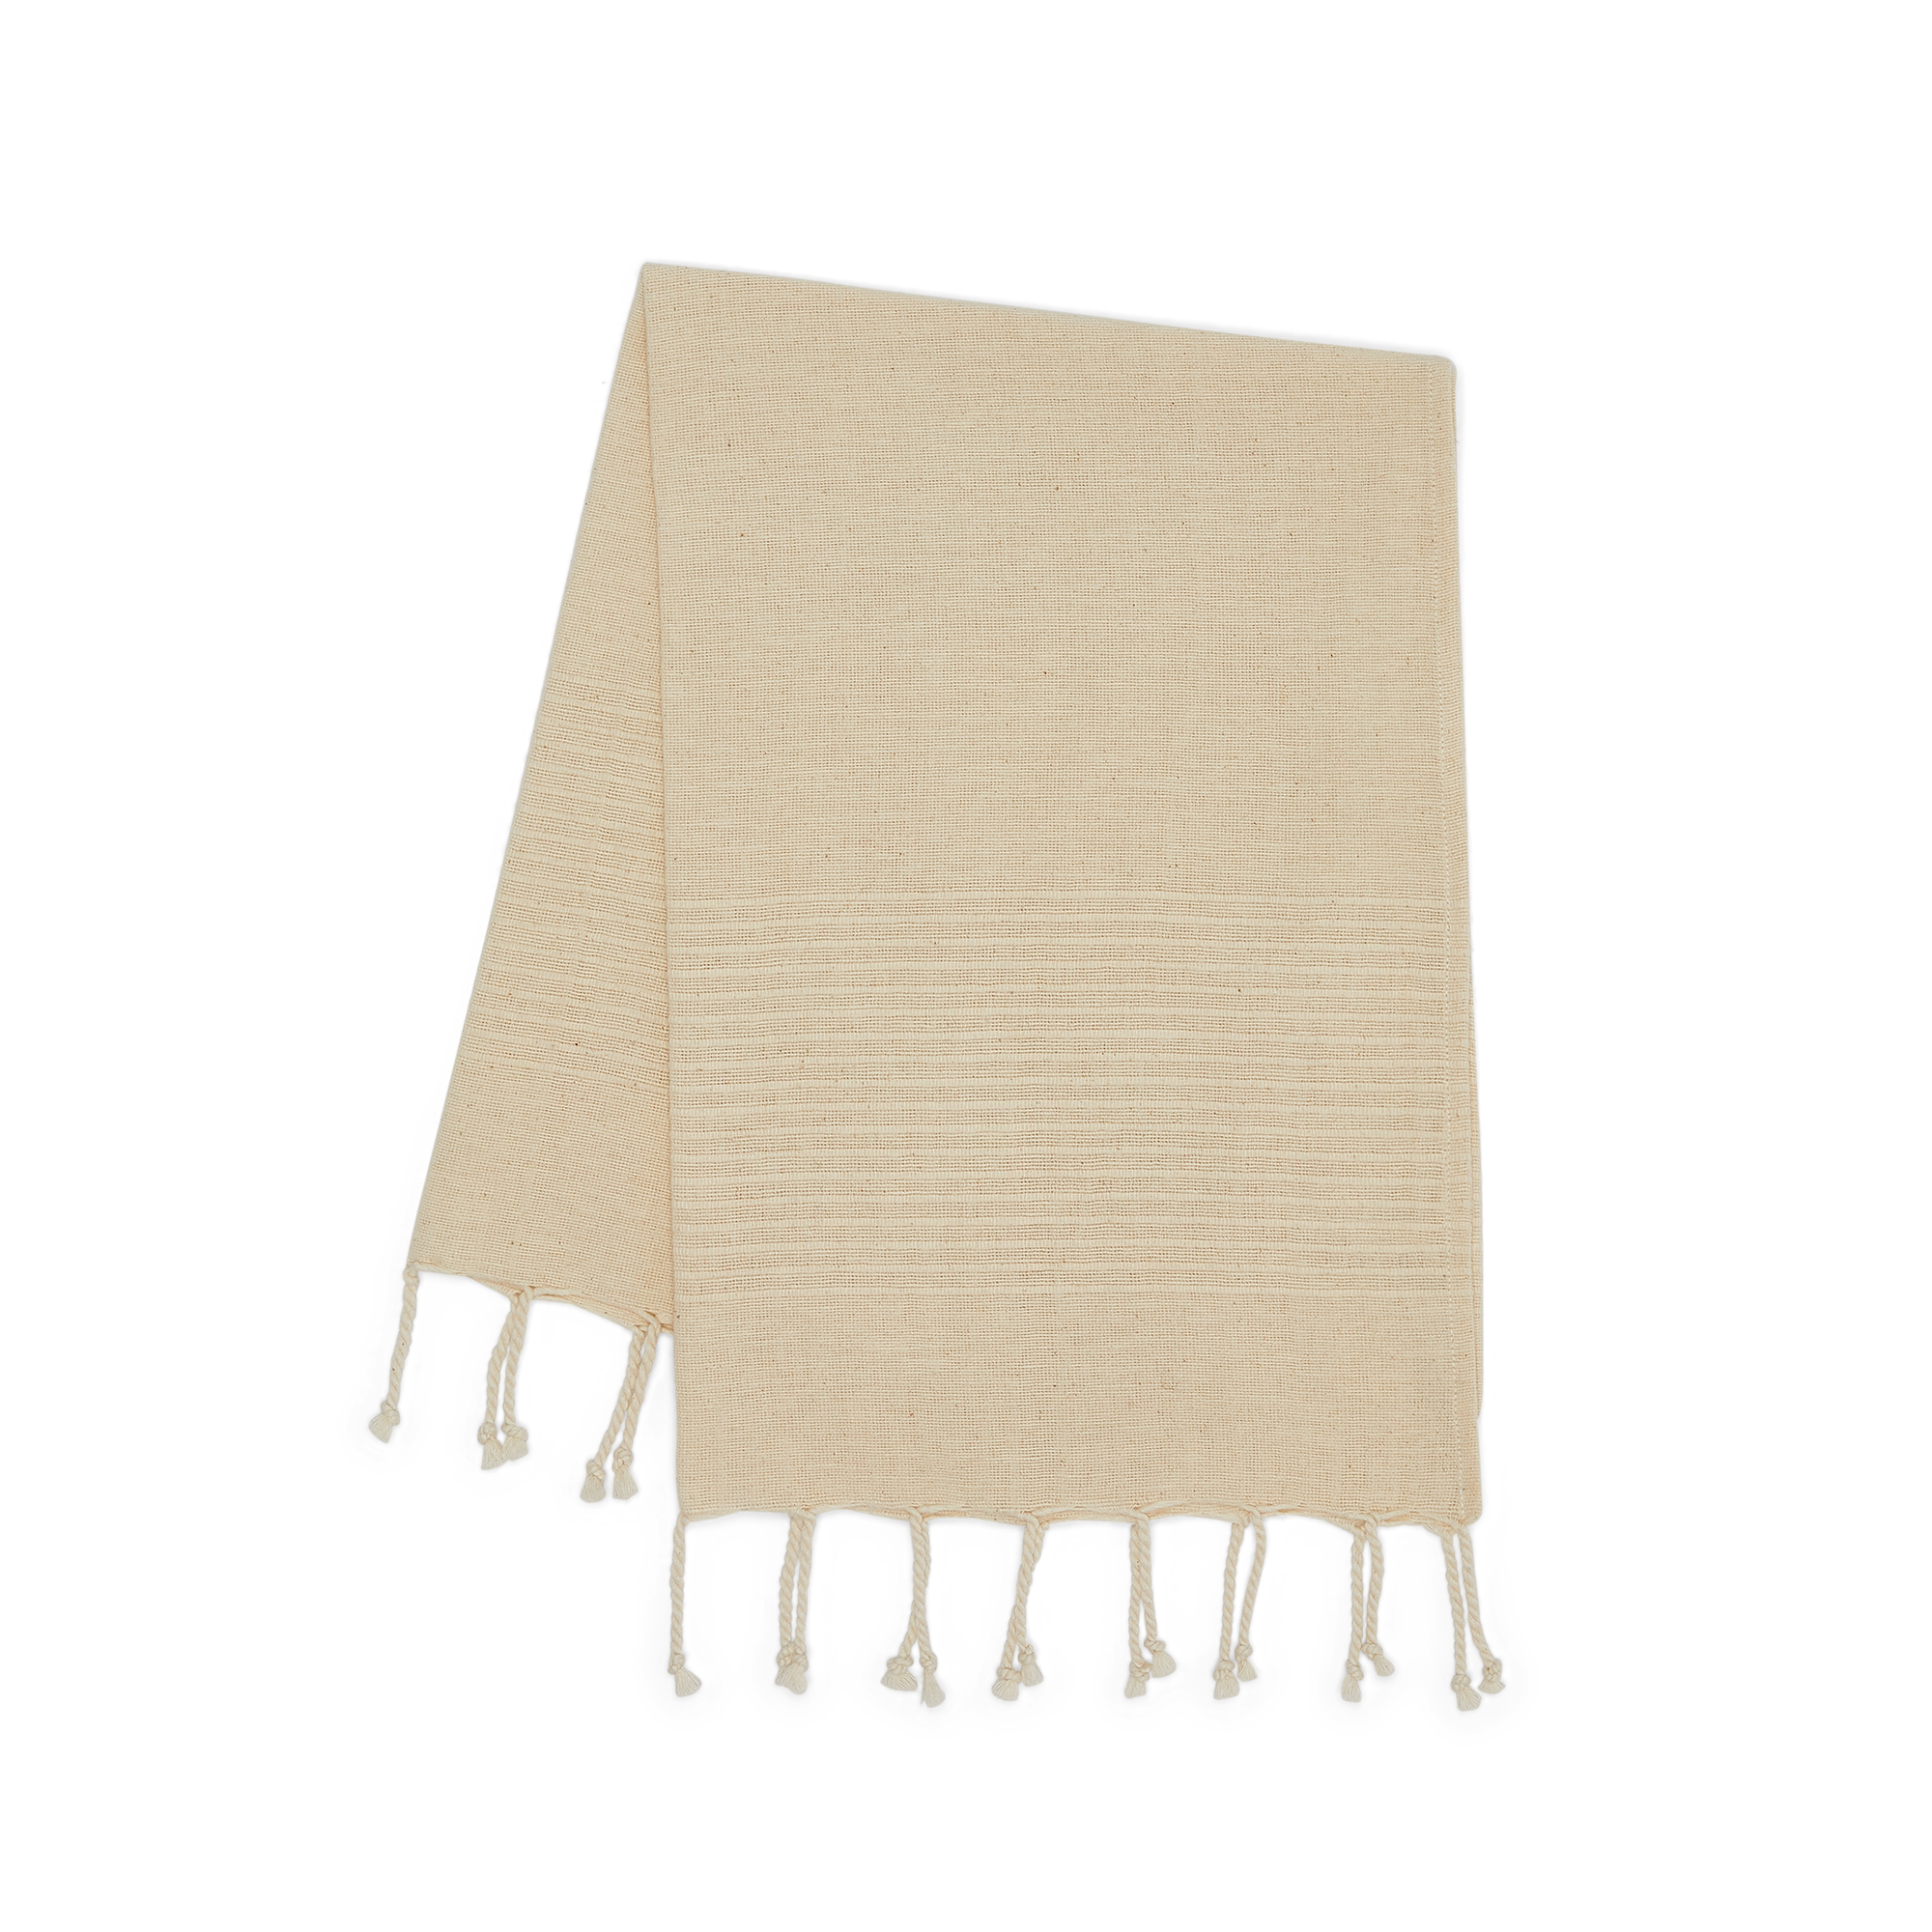 Product photo, showing organic cotton towel in it's natural color with edge fringing.